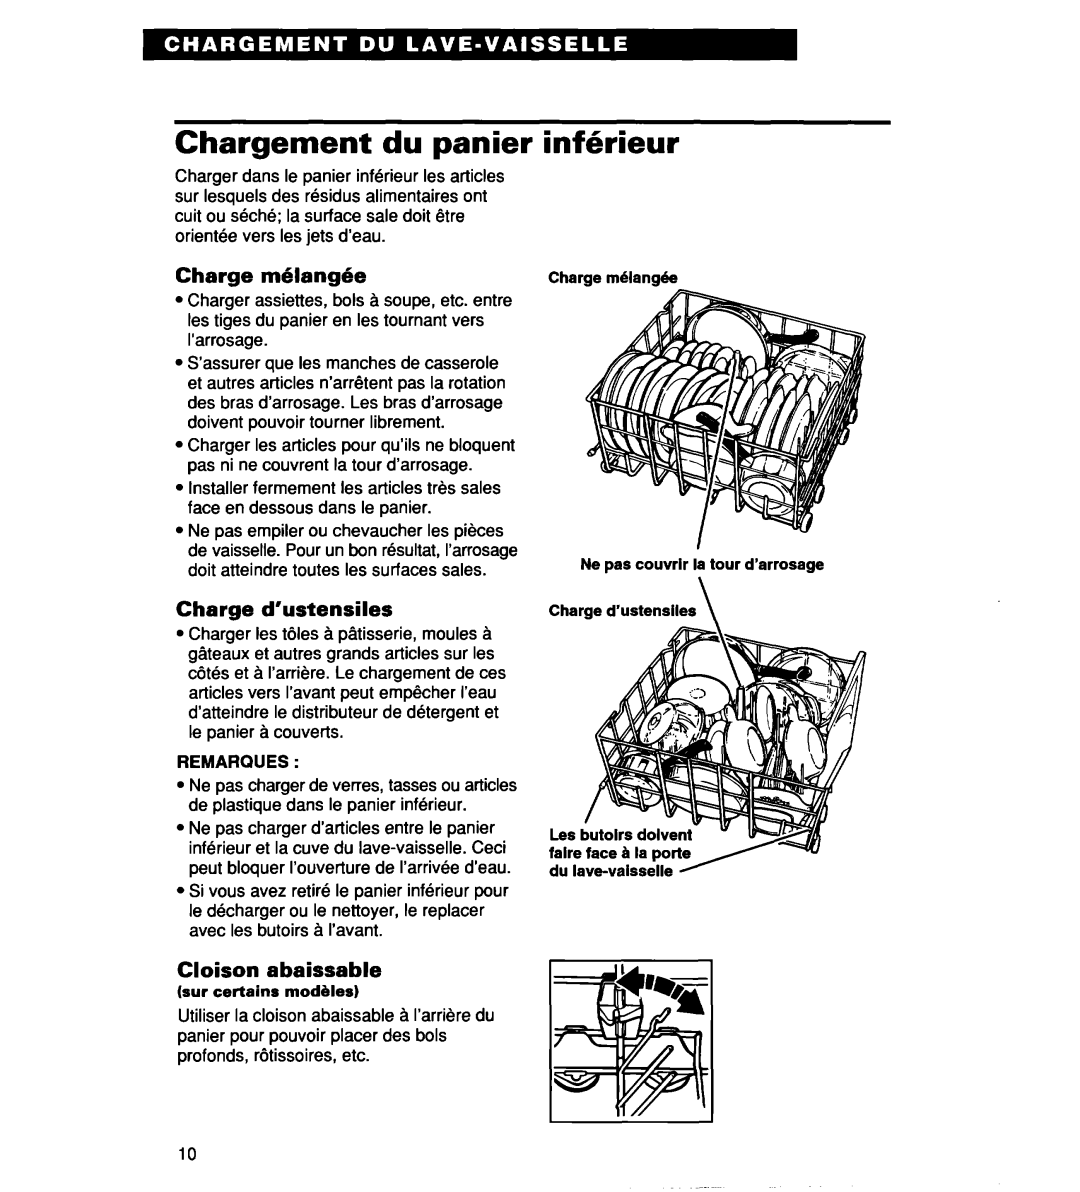 Whirlpool 927 Series, 935 Series Chargement du panier, inferieur, Charge m6lang6e, Charge d’ustensiles, Cloison abaissable 